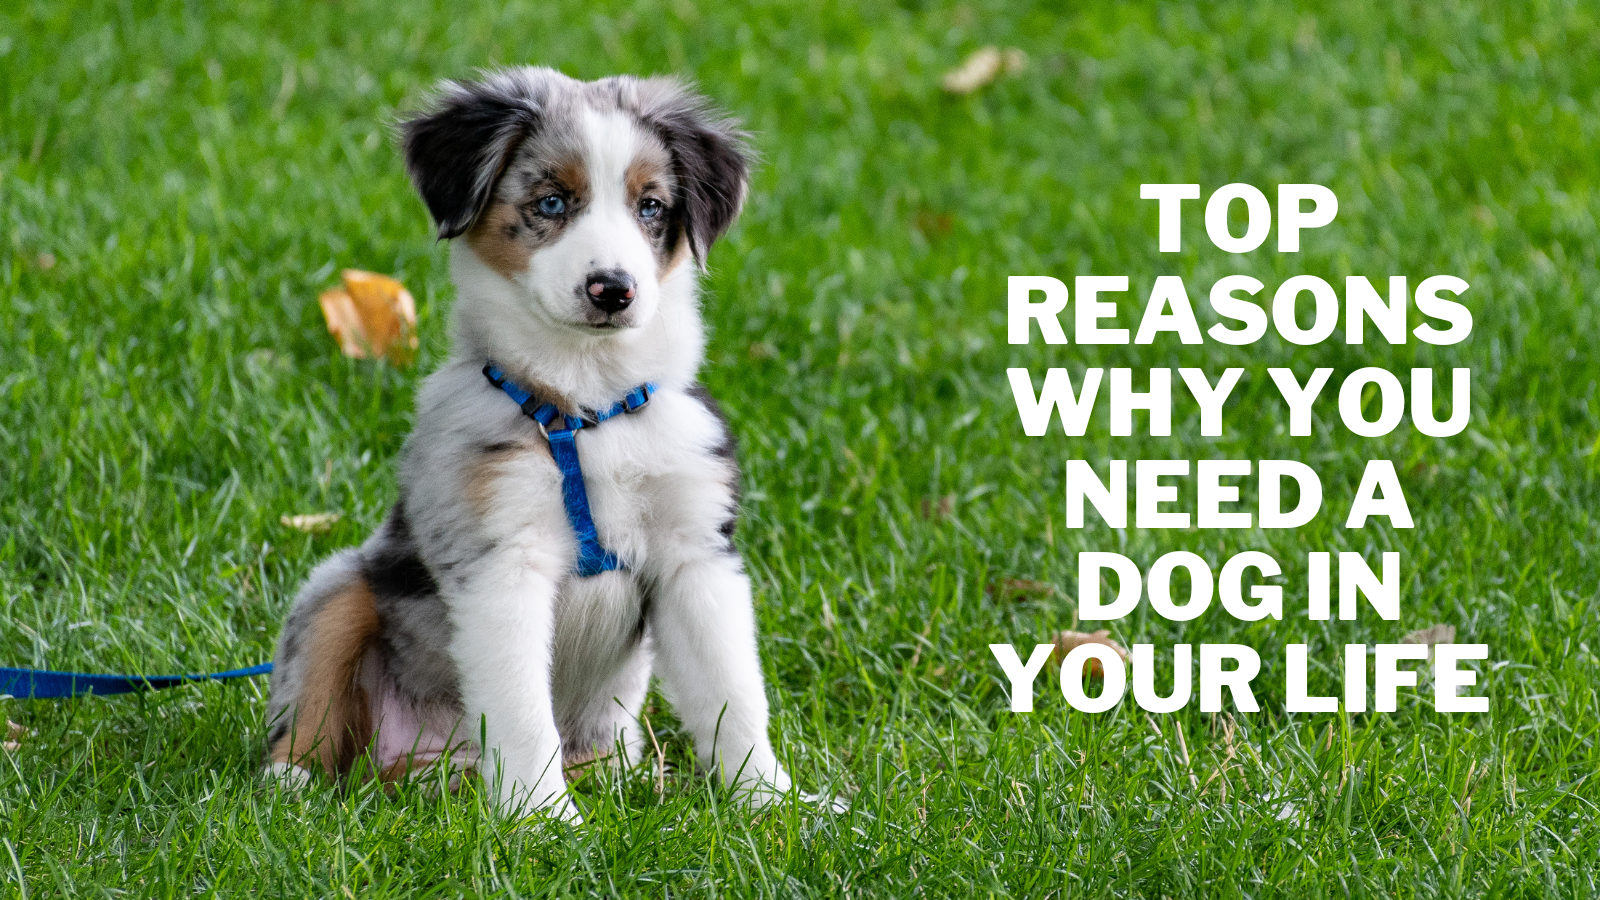 Top Reasons Why You Need A Dog In Your Life